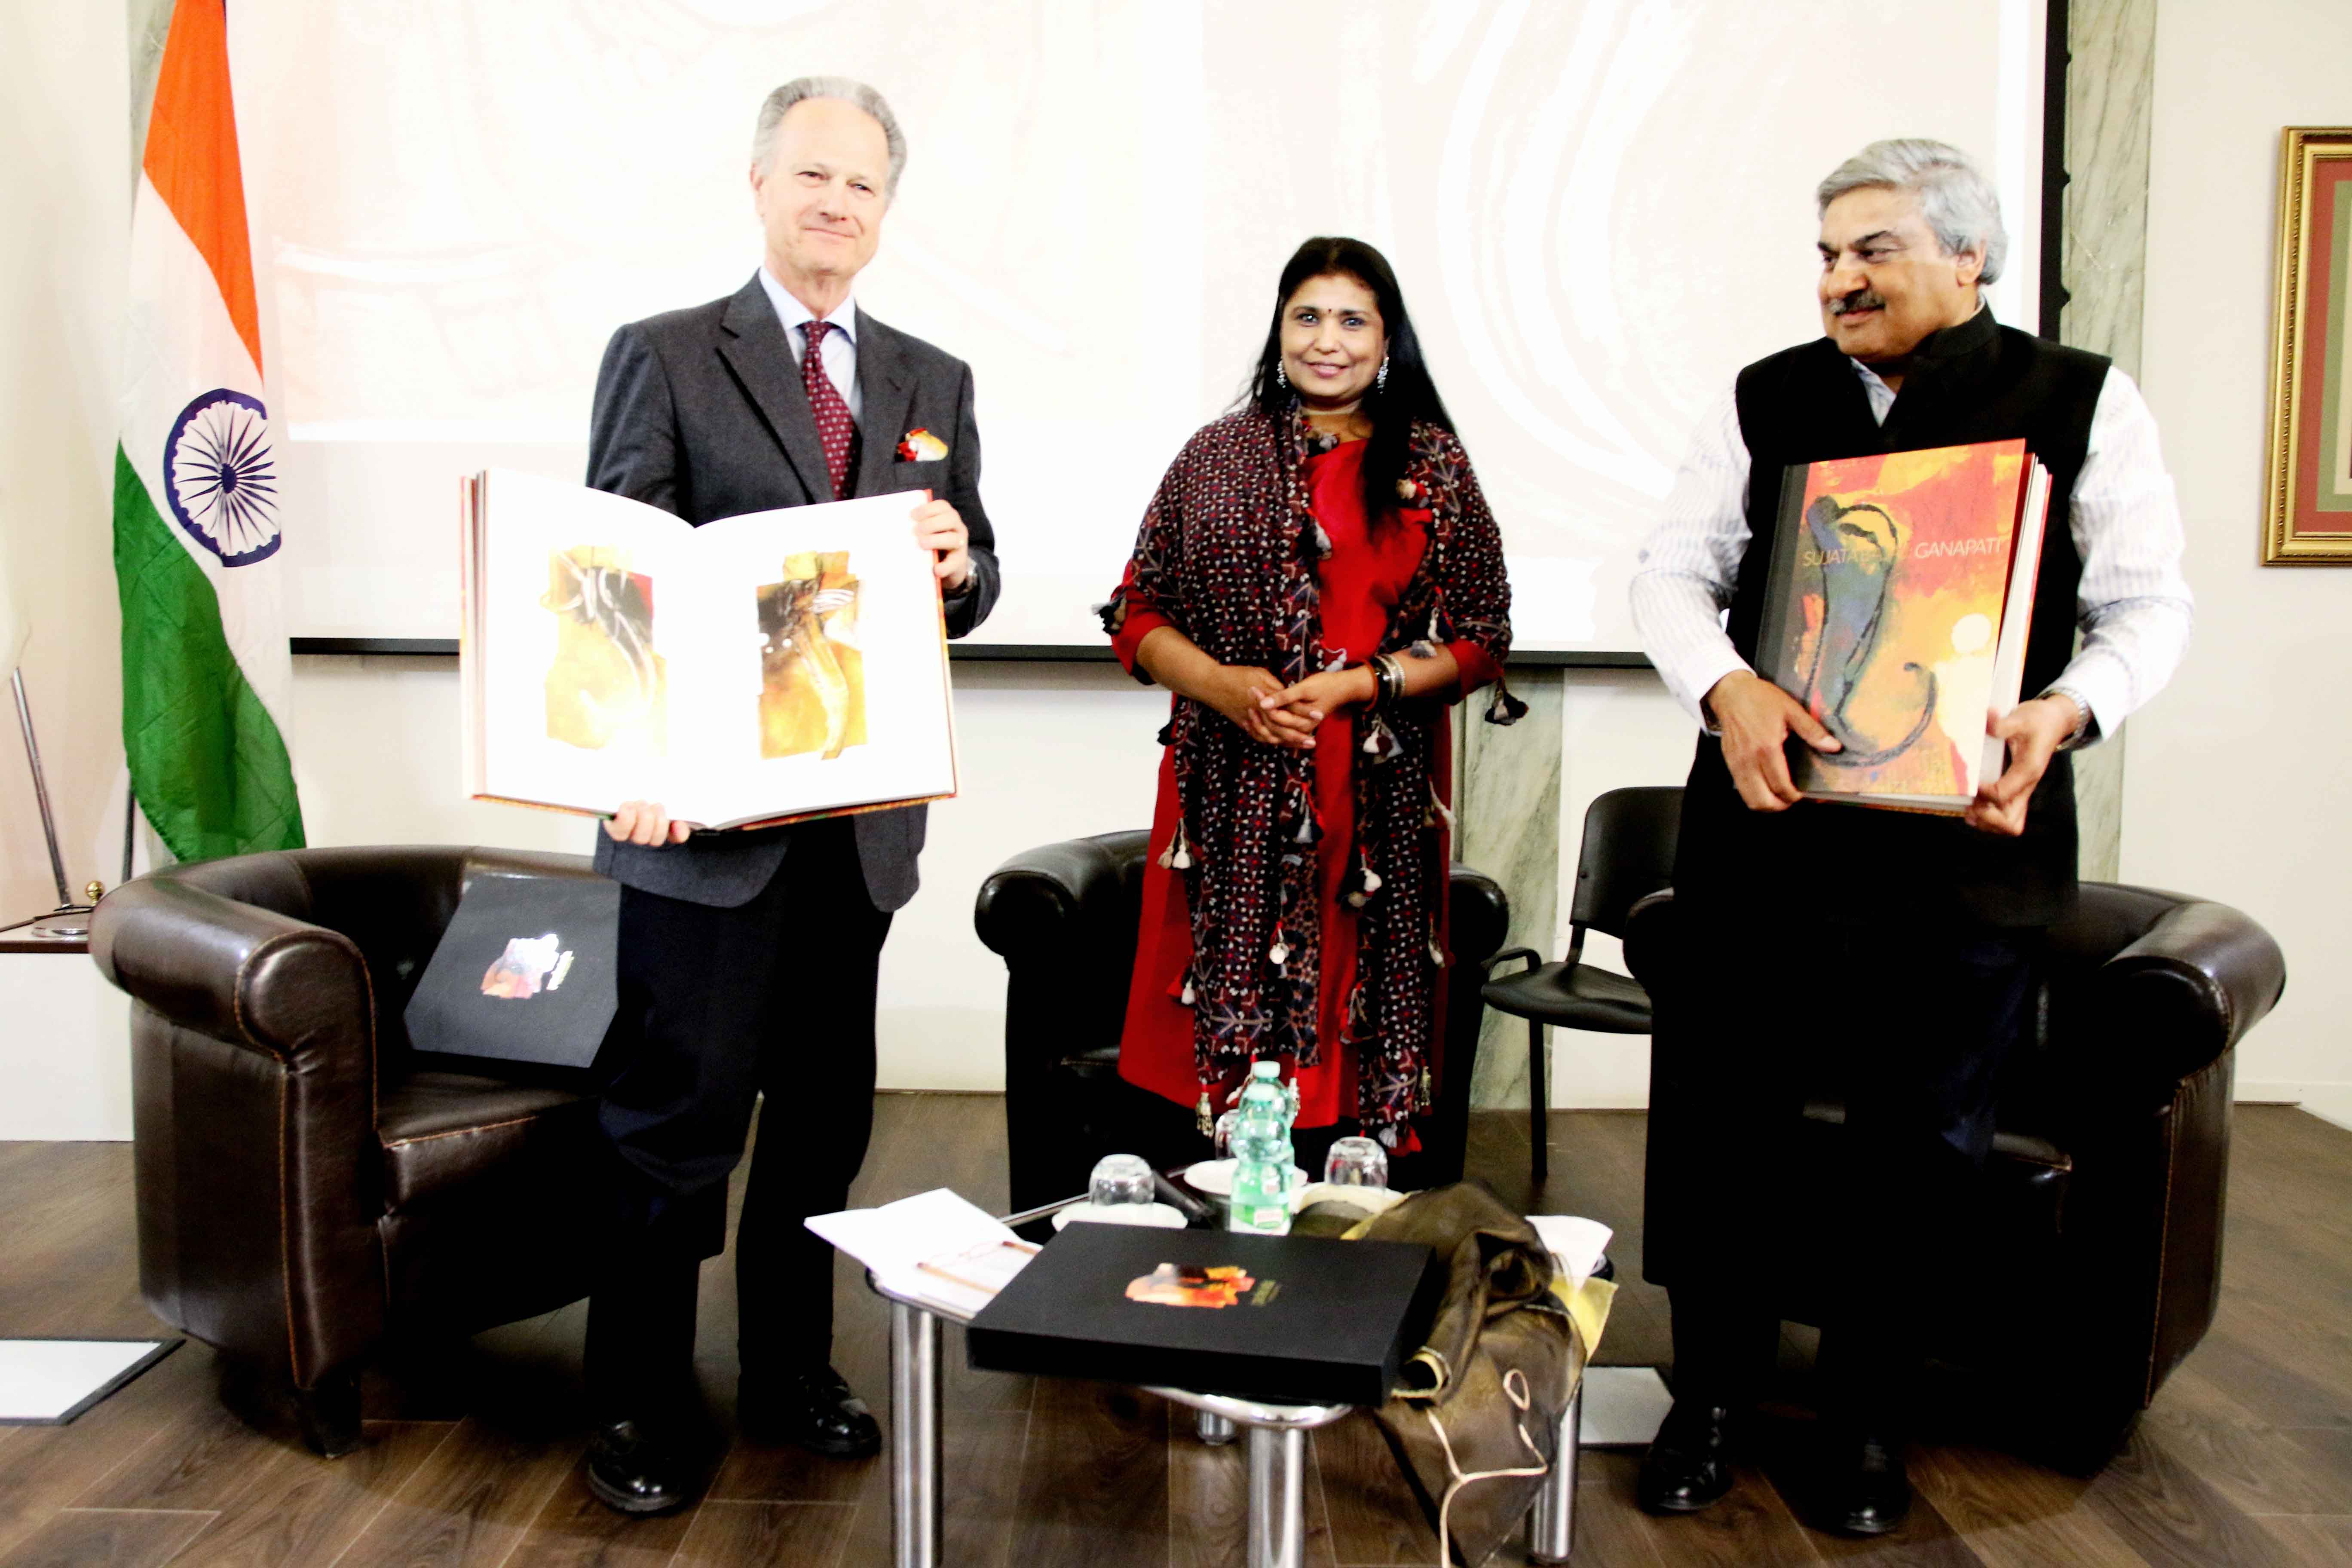 From left to right: Professor Francesco Buranelli, Inspector of the Pontifical Commission for Sacred Archeology of Vatican and Secretary of Commission for Cultural Heritage of the Church, Sujata Bajaj and Indian Ambassador Anil Wadhwa